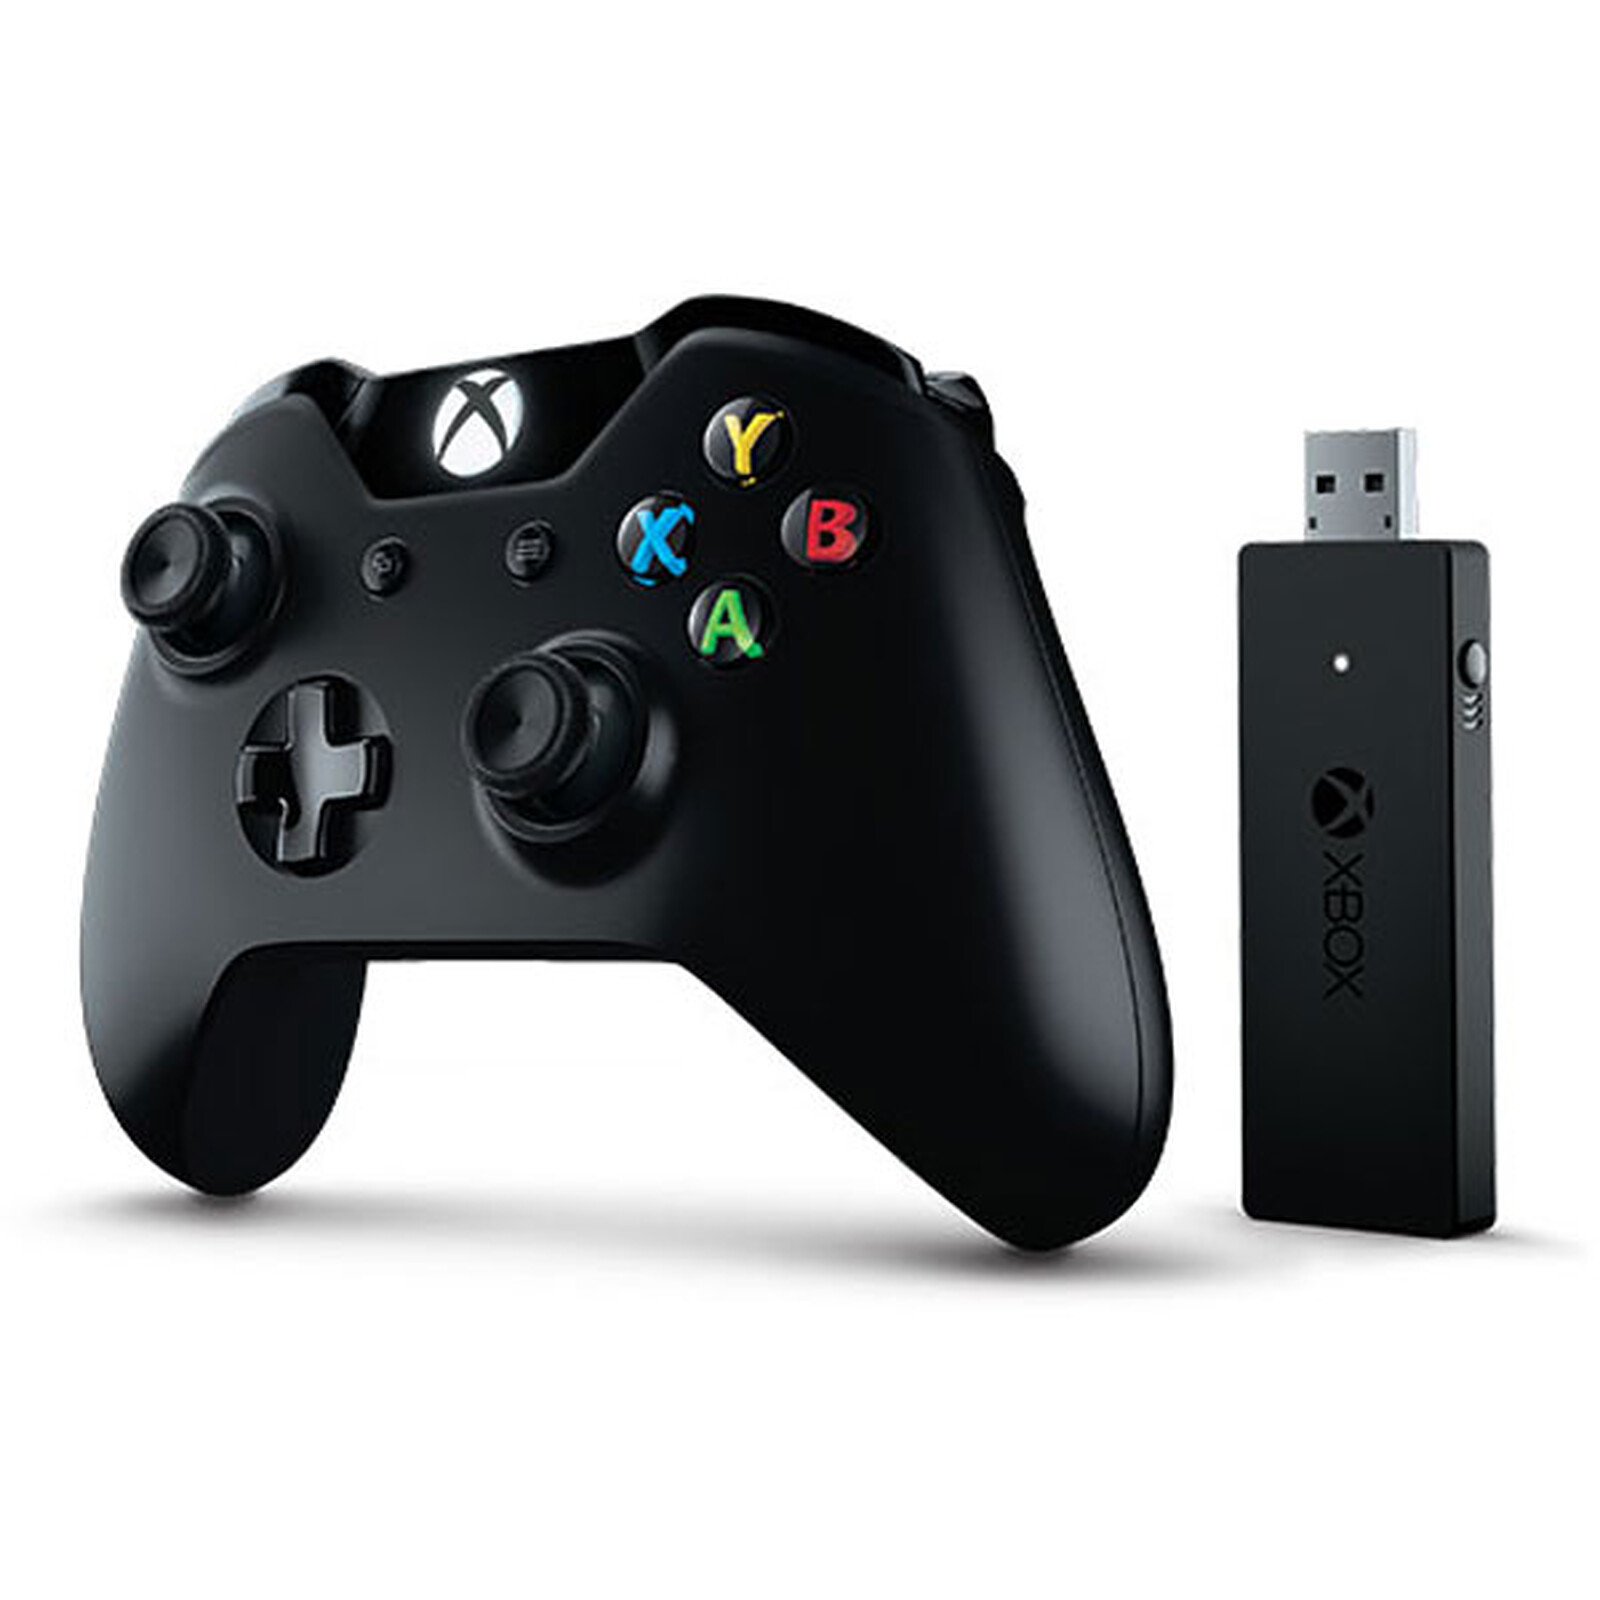 xbox controller adapter driver